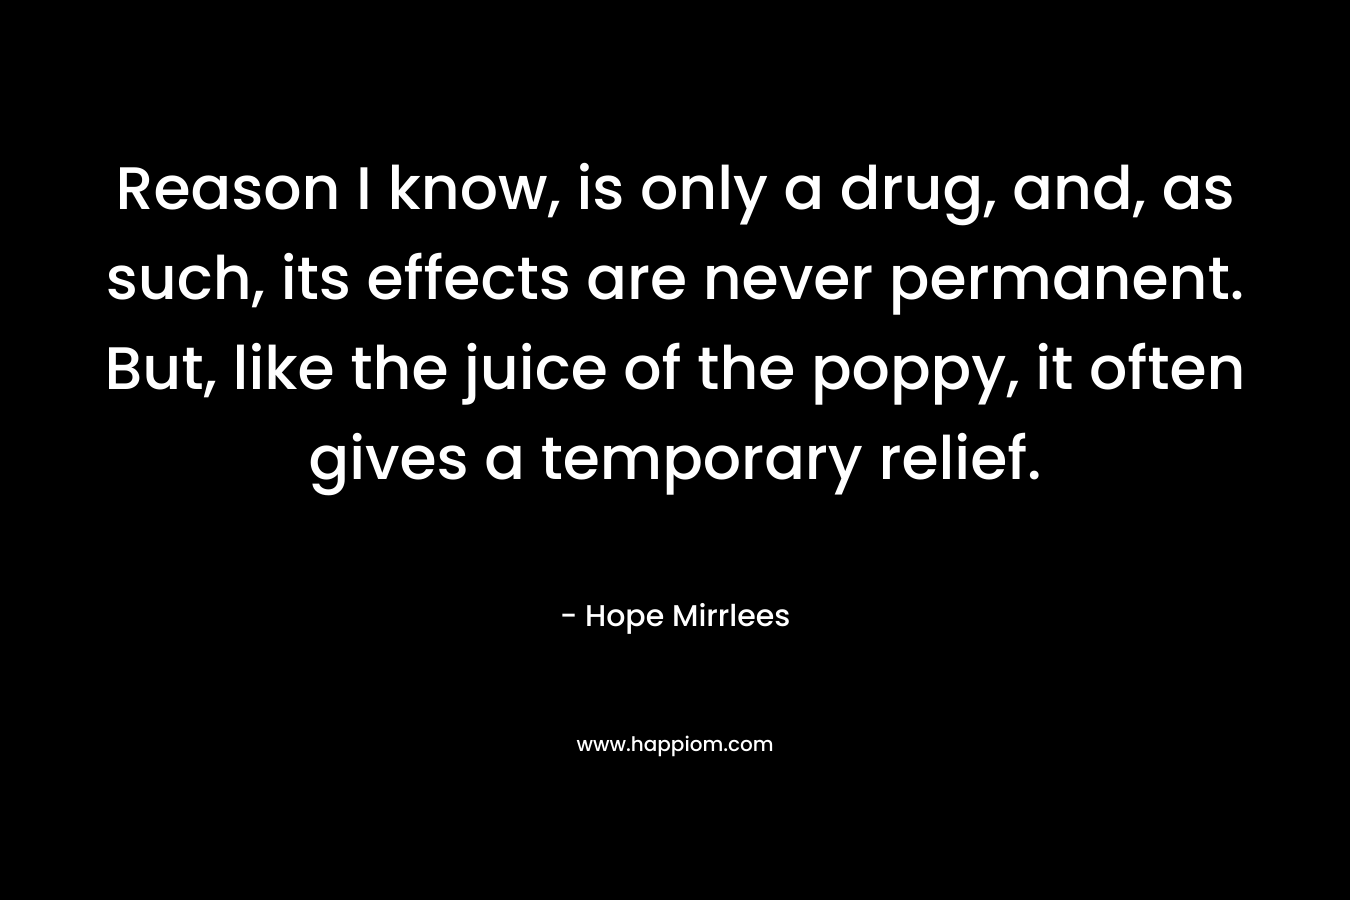 Reason I know, is only a drug, and, as such, its effects are never permanent. But, like the juice of the poppy, it often gives a temporary relief.